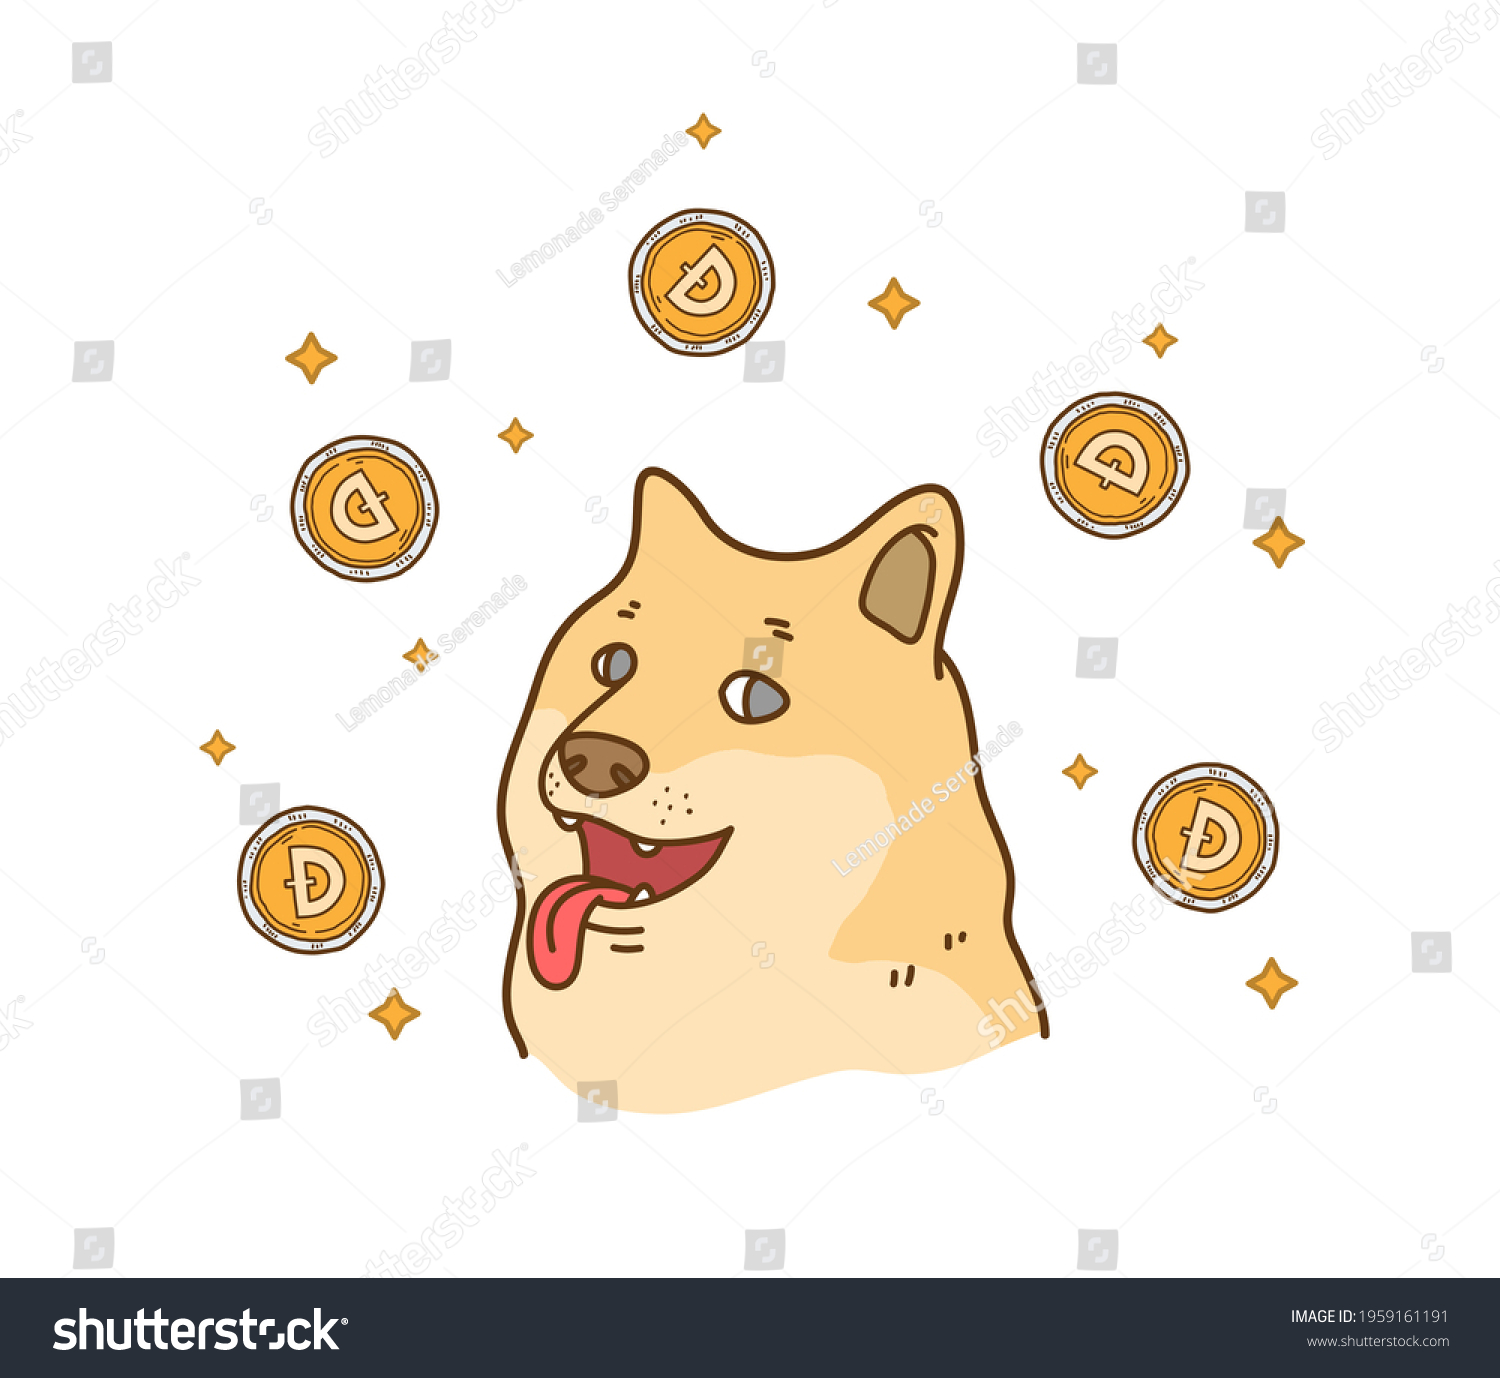 SVG of Dogecoin and doge dog meme, a hand drawn vector illustration of a funny Shiba Inu dog meme with its tongue sticking out and dogecoins all around its head, isolated on white background. svg